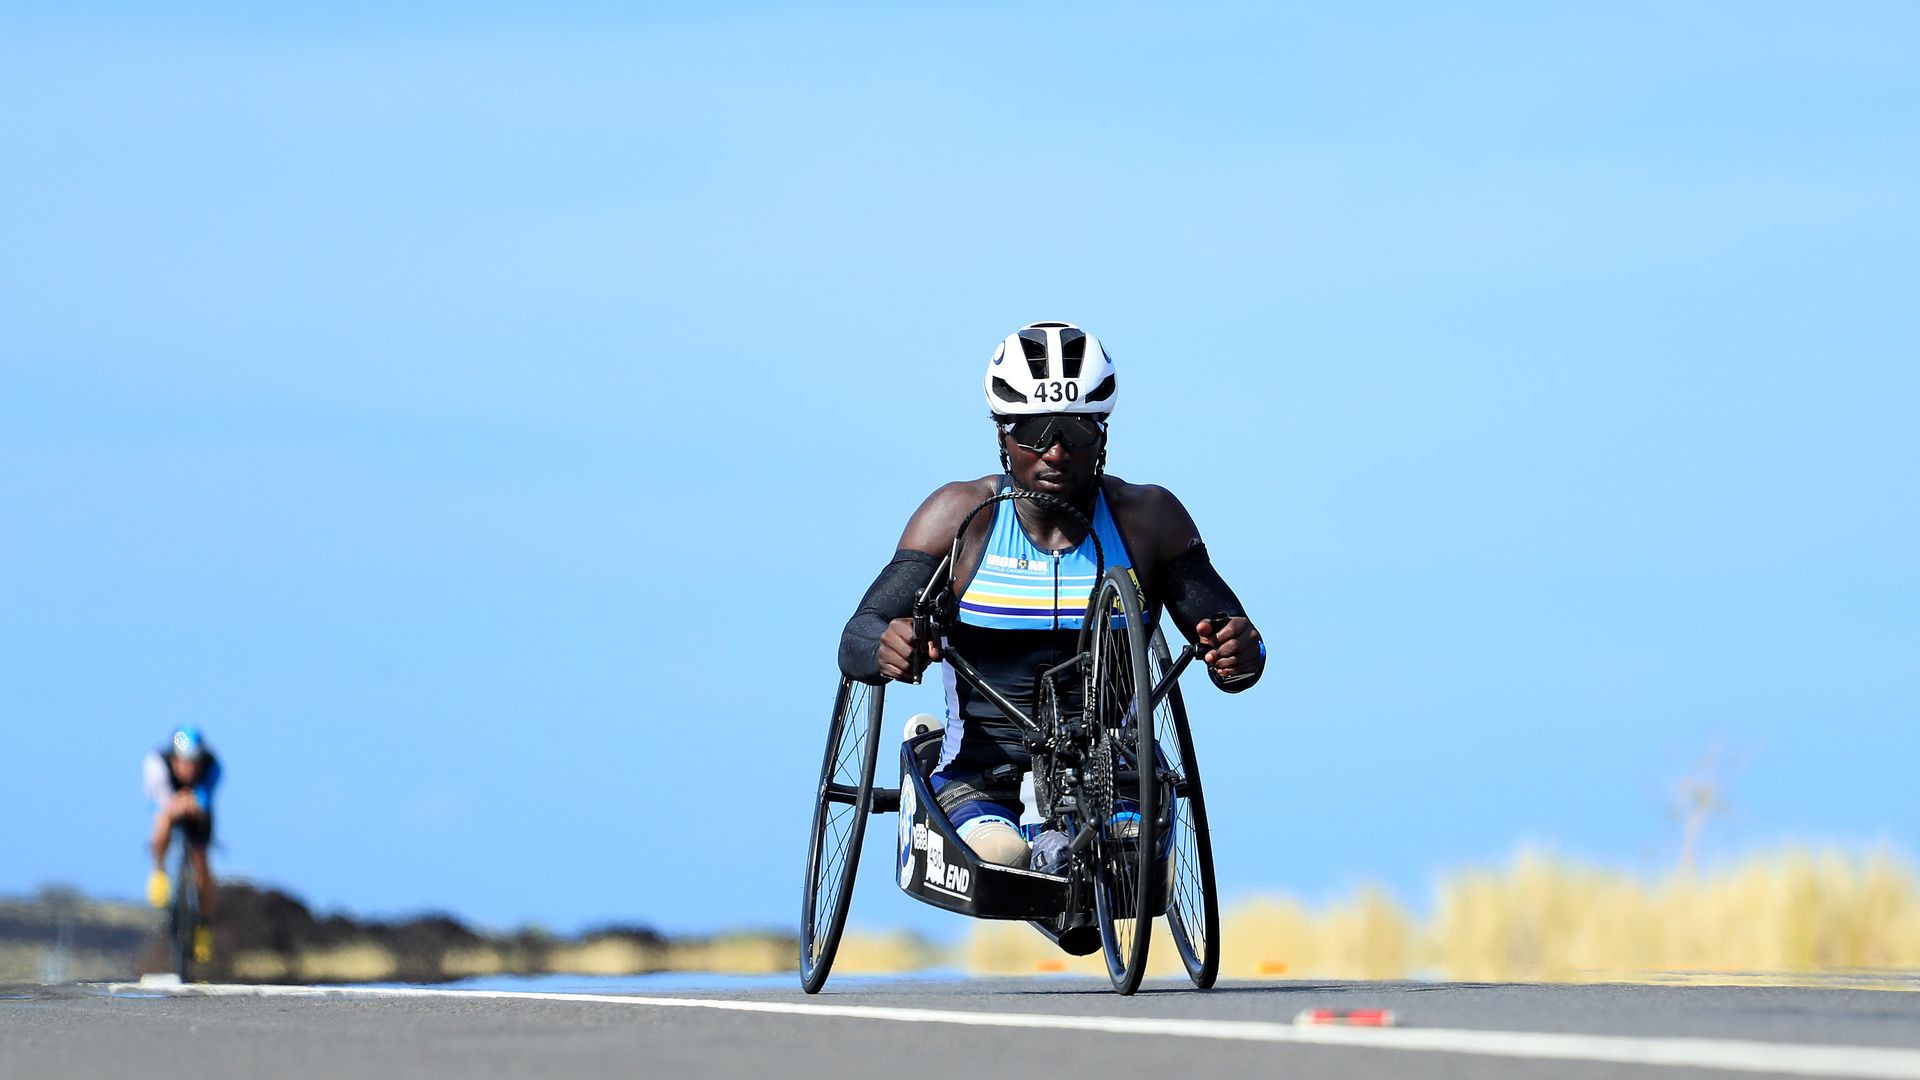 Roderick Sewell competing in the 2019 Ironman World Championships